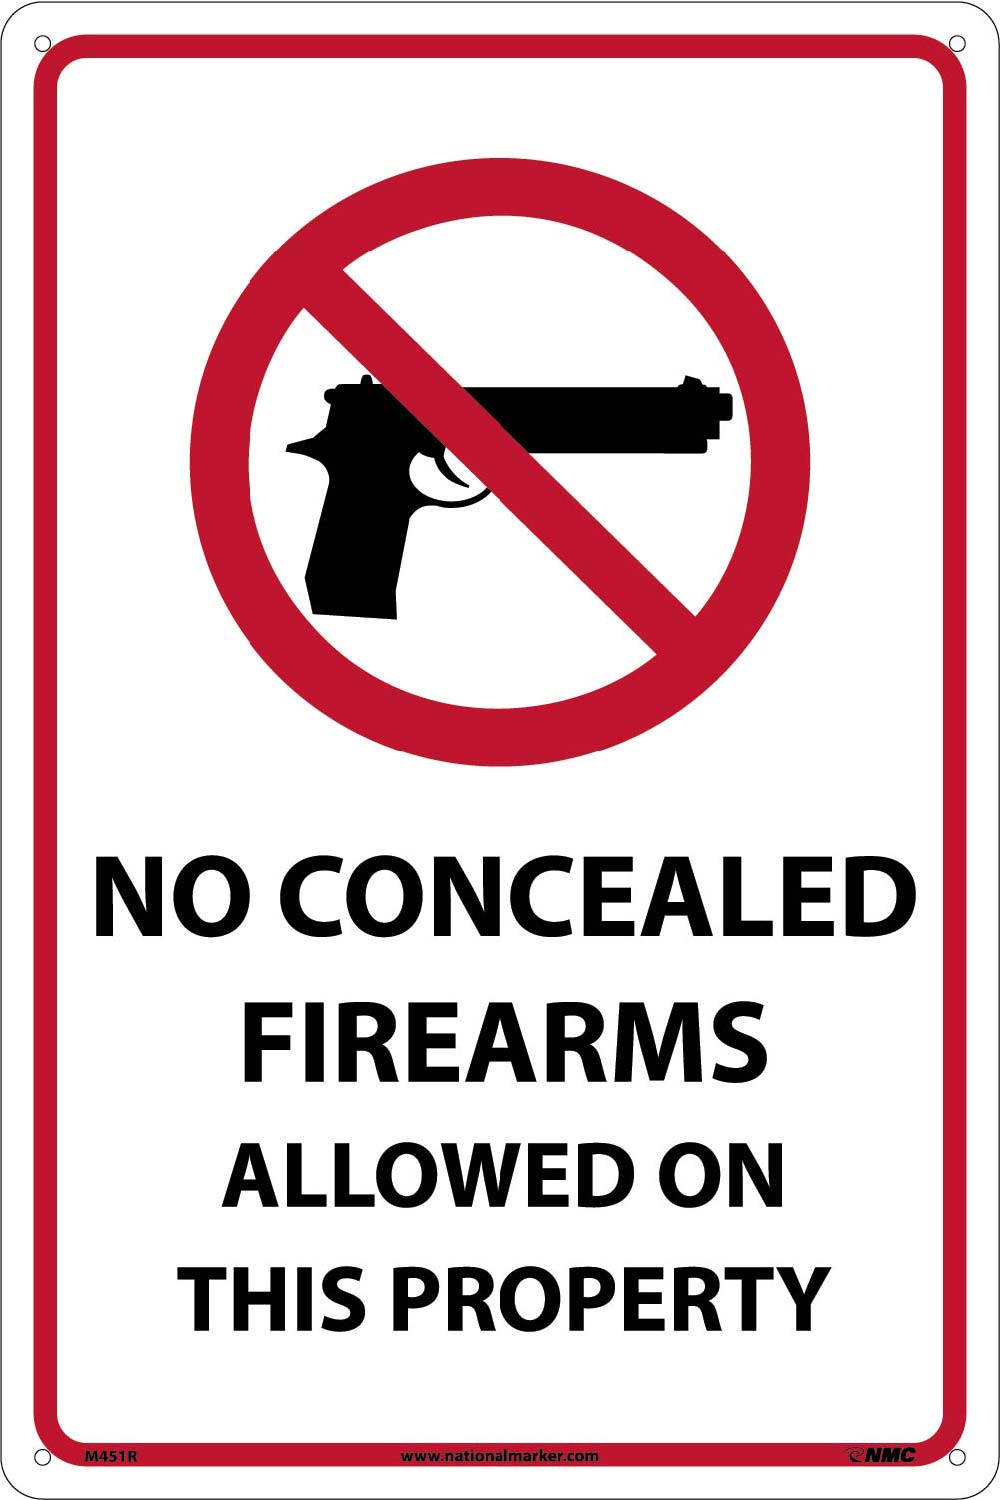 No Concealed Firearms Allowed On This Property Sign-eSafety Supplies, Inc